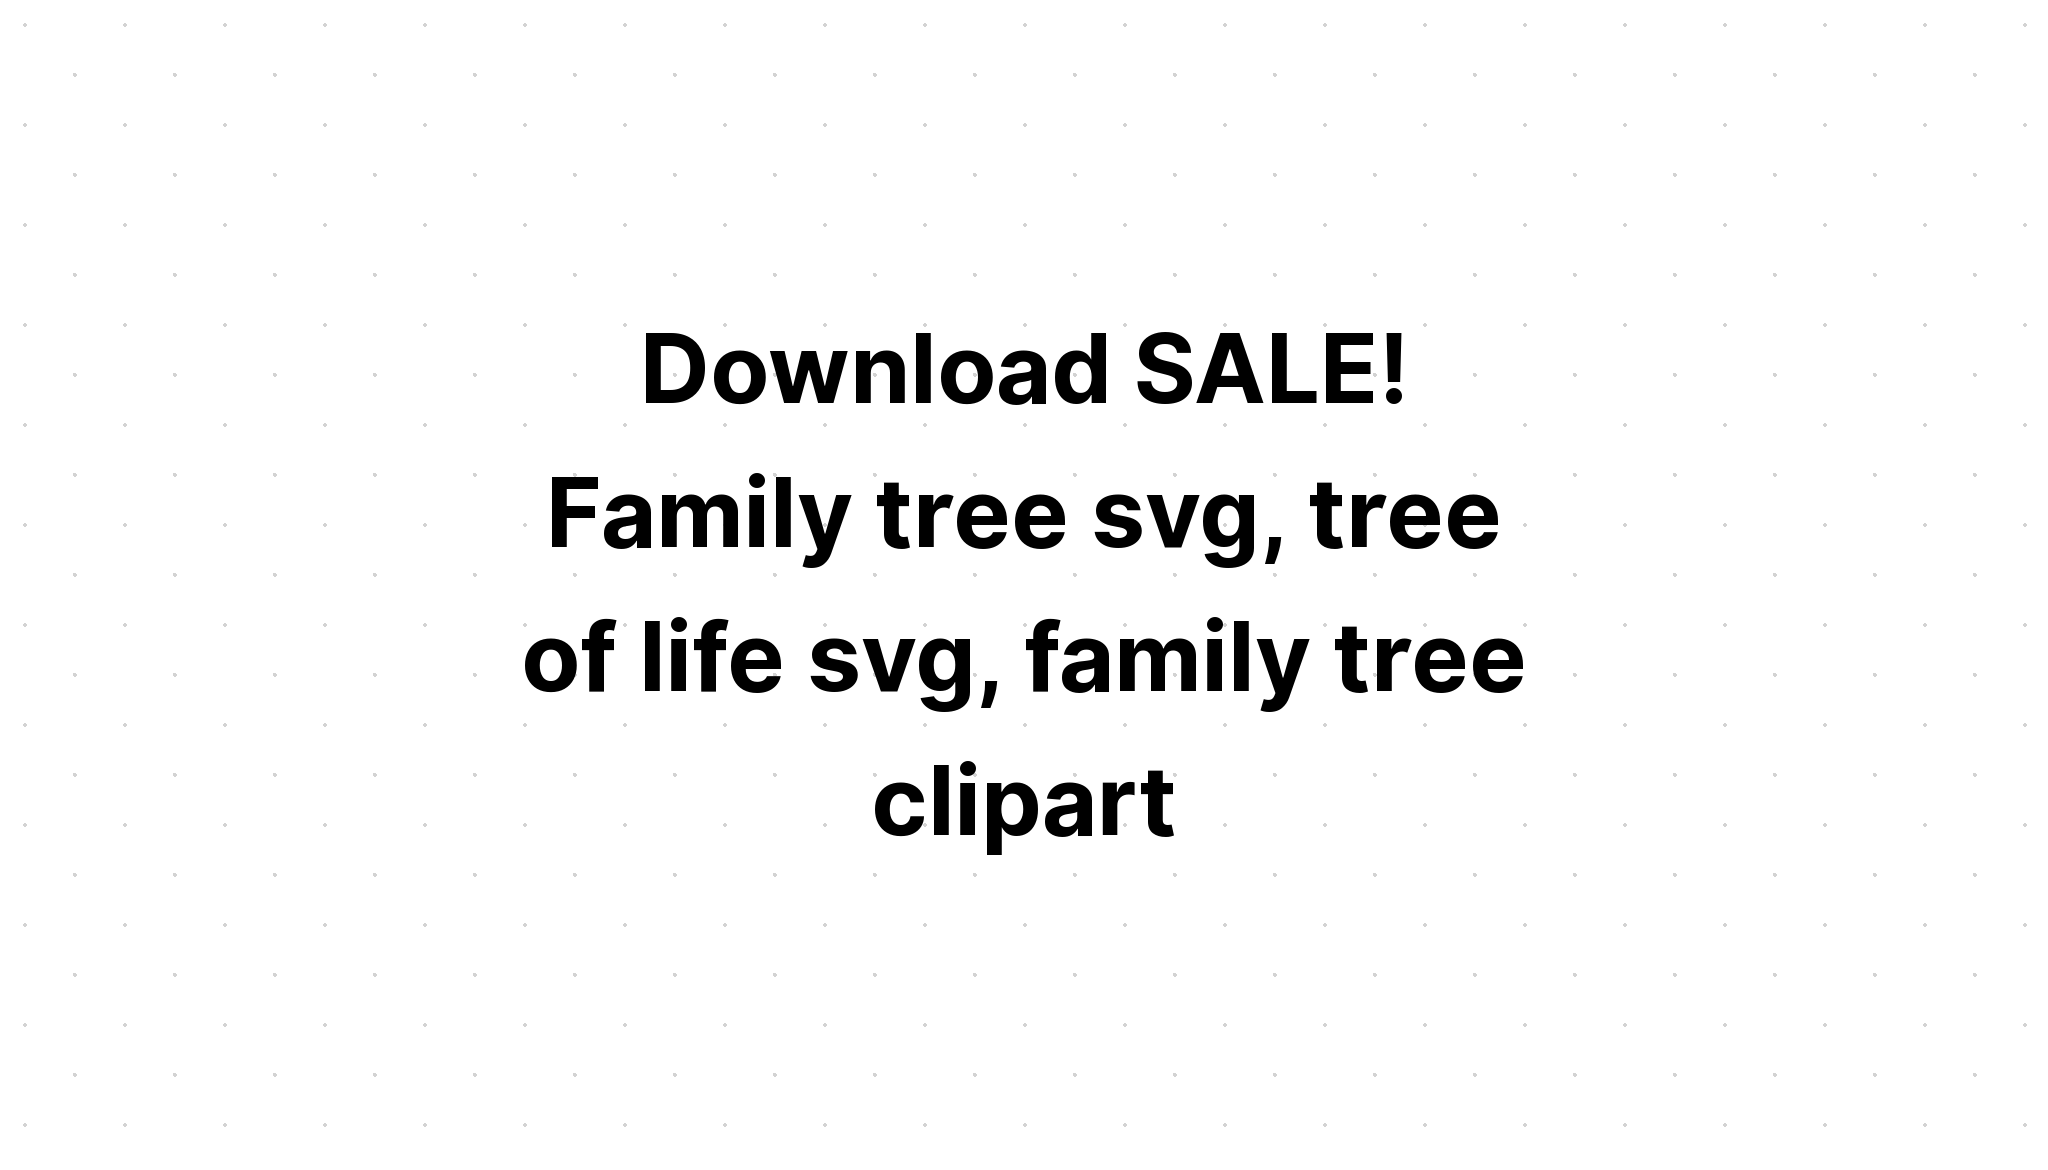 Download Family Tree Svg 8 Members Reunion Svg SVG File